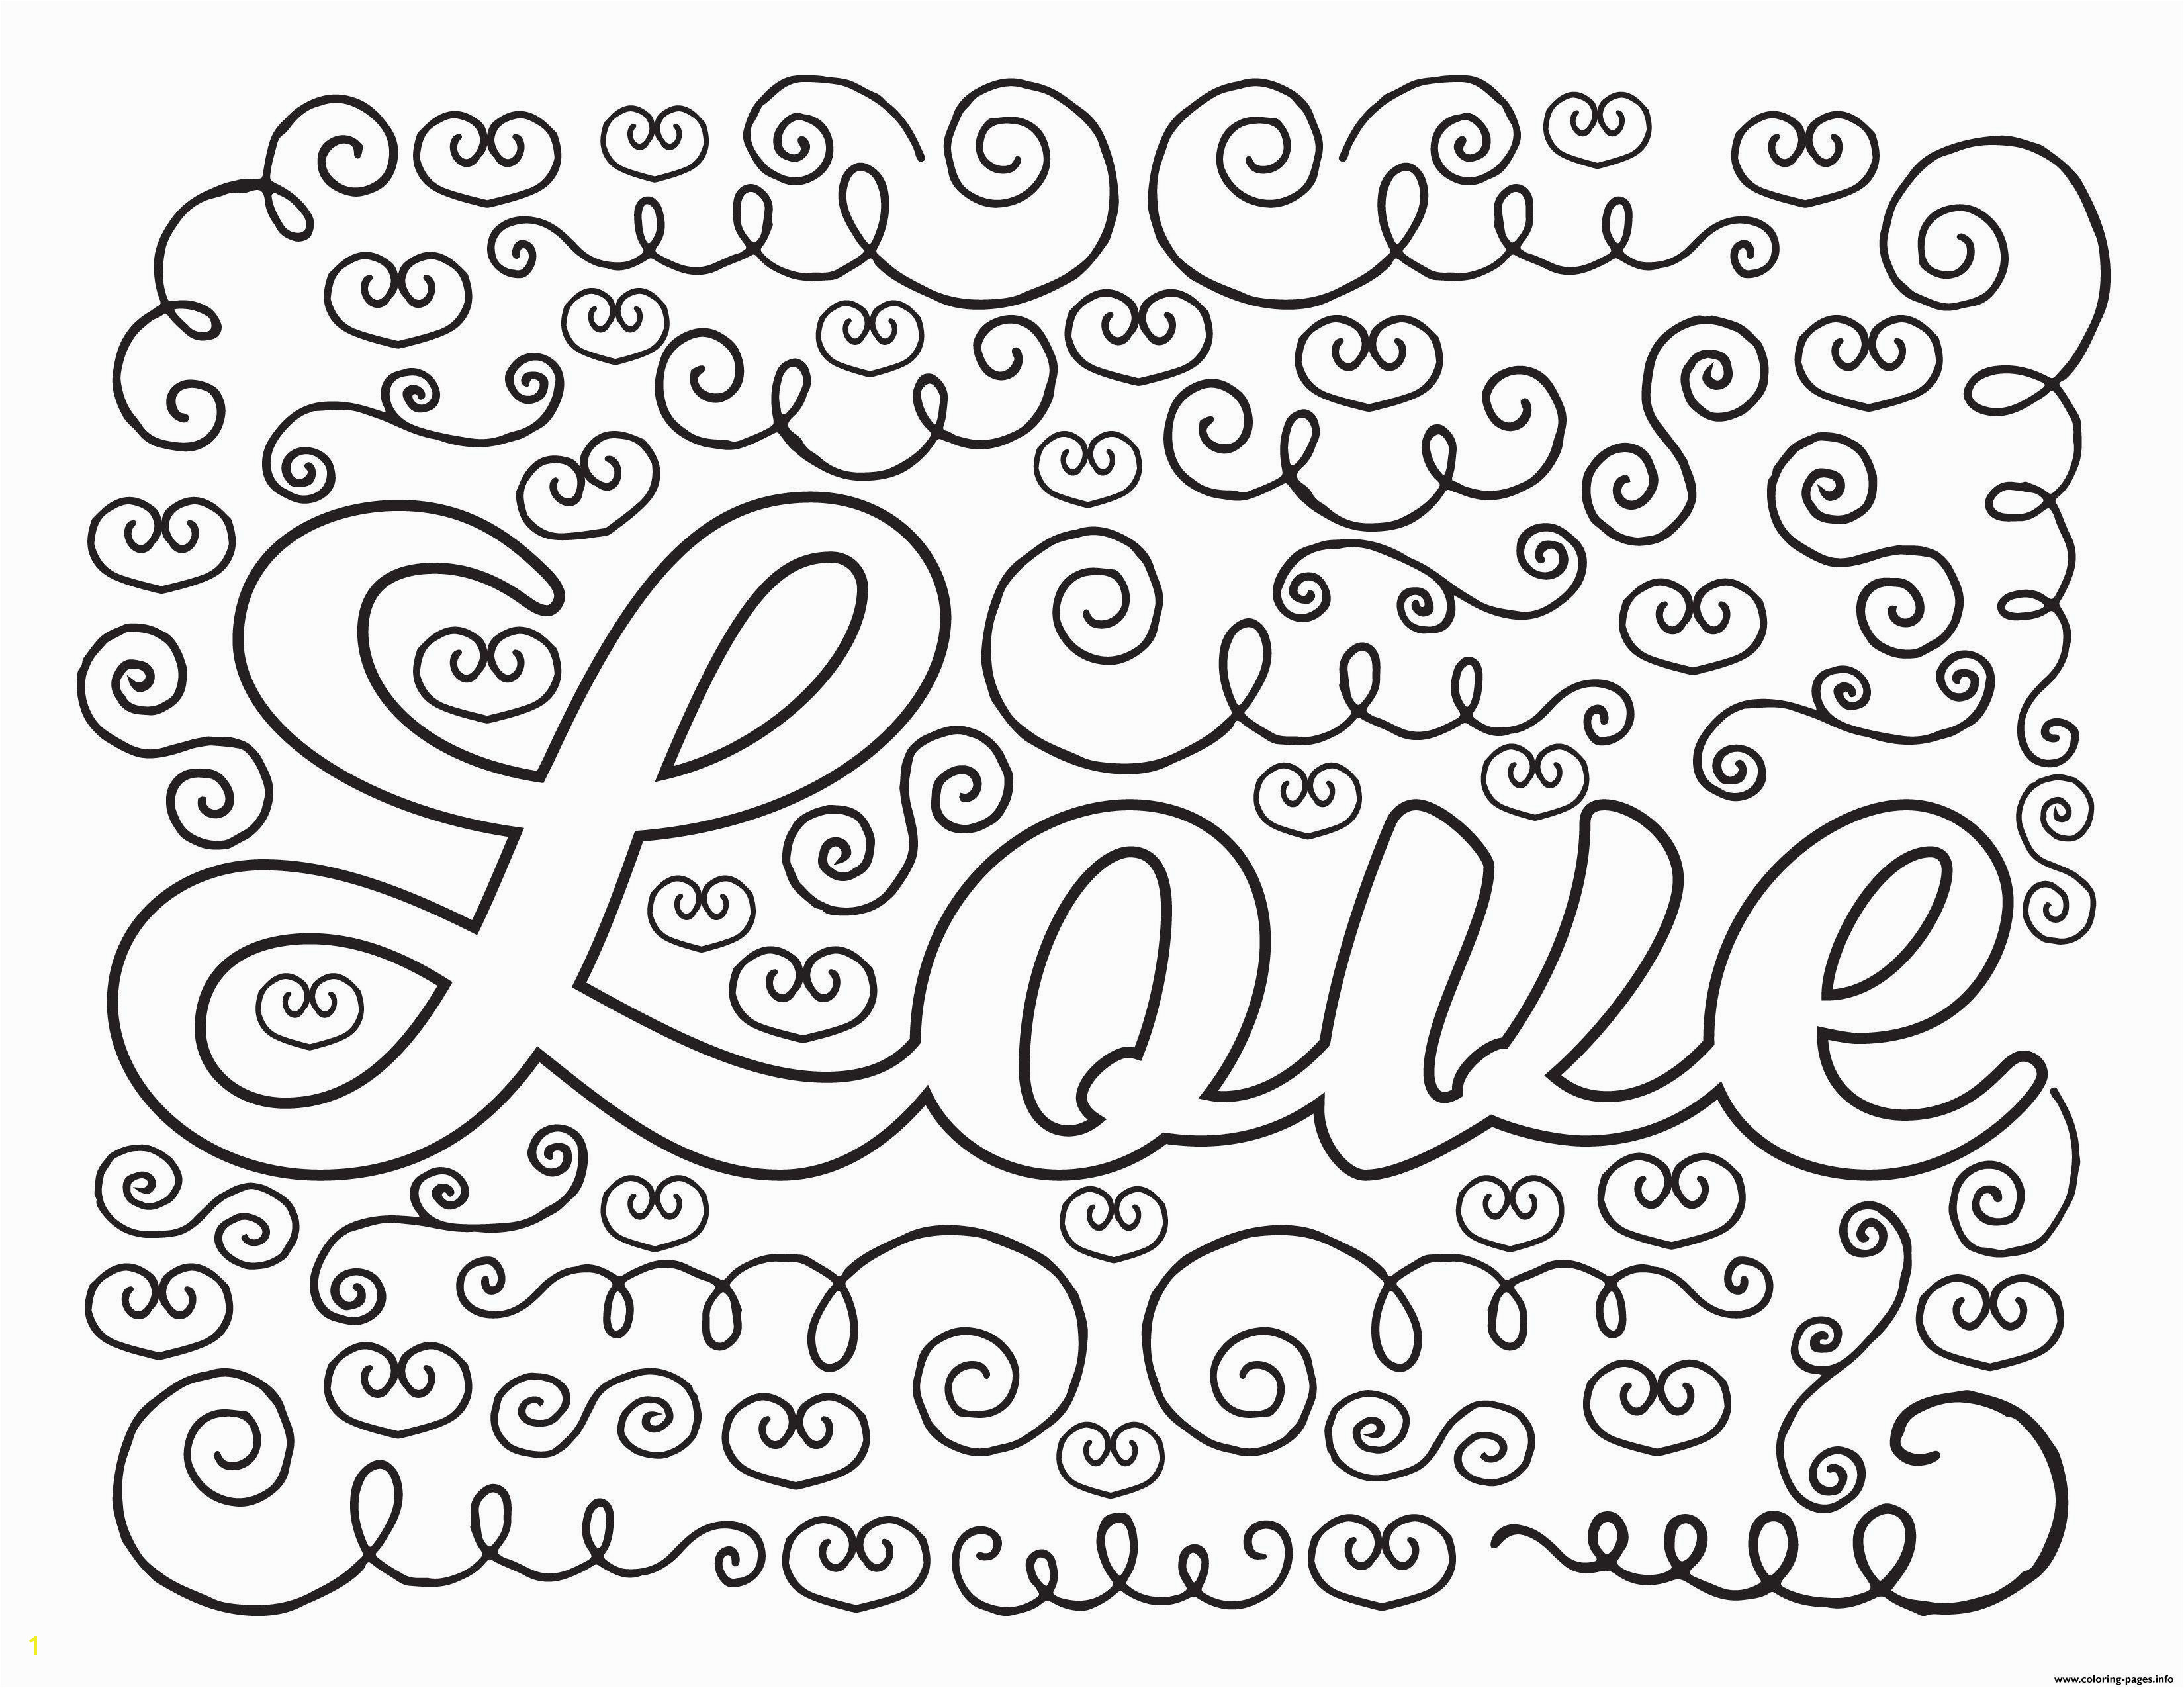 Printable Fruits New Love Coloring Pages for Adults Best Best Kawaii Coloring Pages Od